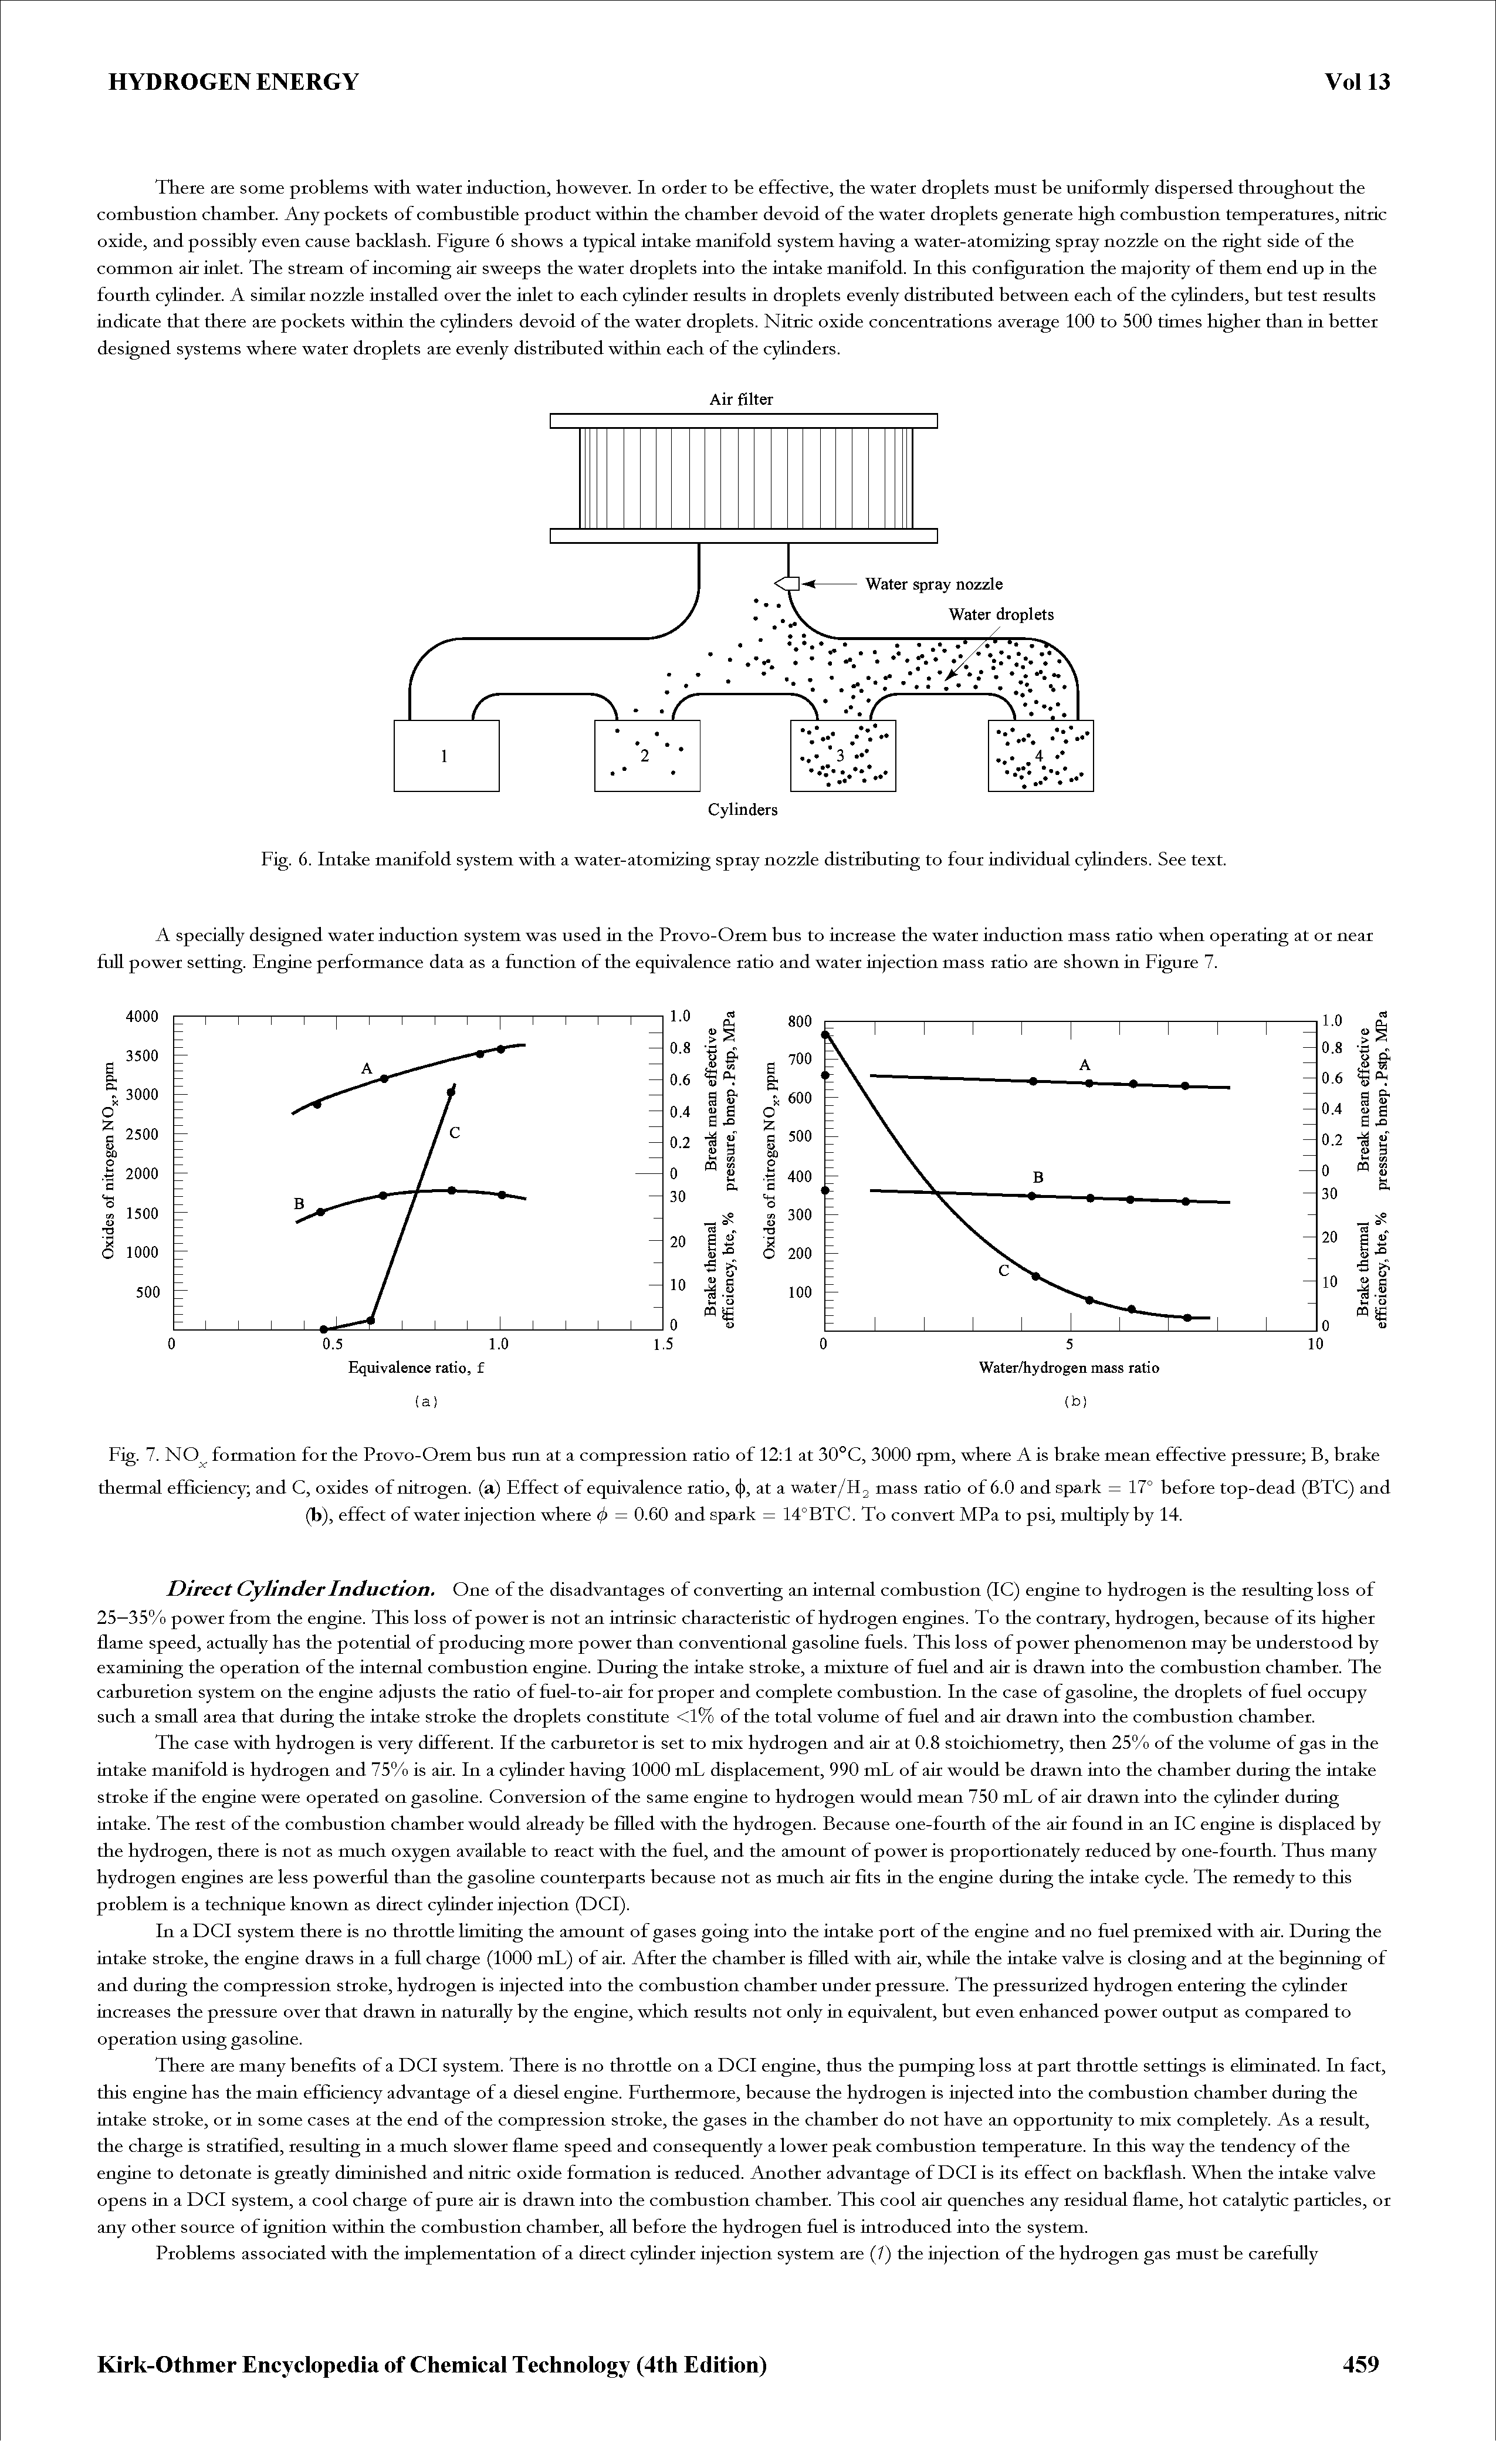 Fig. 7. NO formation for the Provo-Orem bus mn at a compression ratio of 12 1 at 30°C, 3000 rpm, where A is brake mean effective pressure B, brake thermal efficiency and C, oxides of nitrogen, (a) Effect of equivalence ratio, ( ), at a water/H2 mass ratio of 6.0 and spark = 17° before top-dead (BTC) and (b), effect of water injection where (j) = 0.60 and spark = 14°BTC. To convert MPa to psi, multiply by 14.